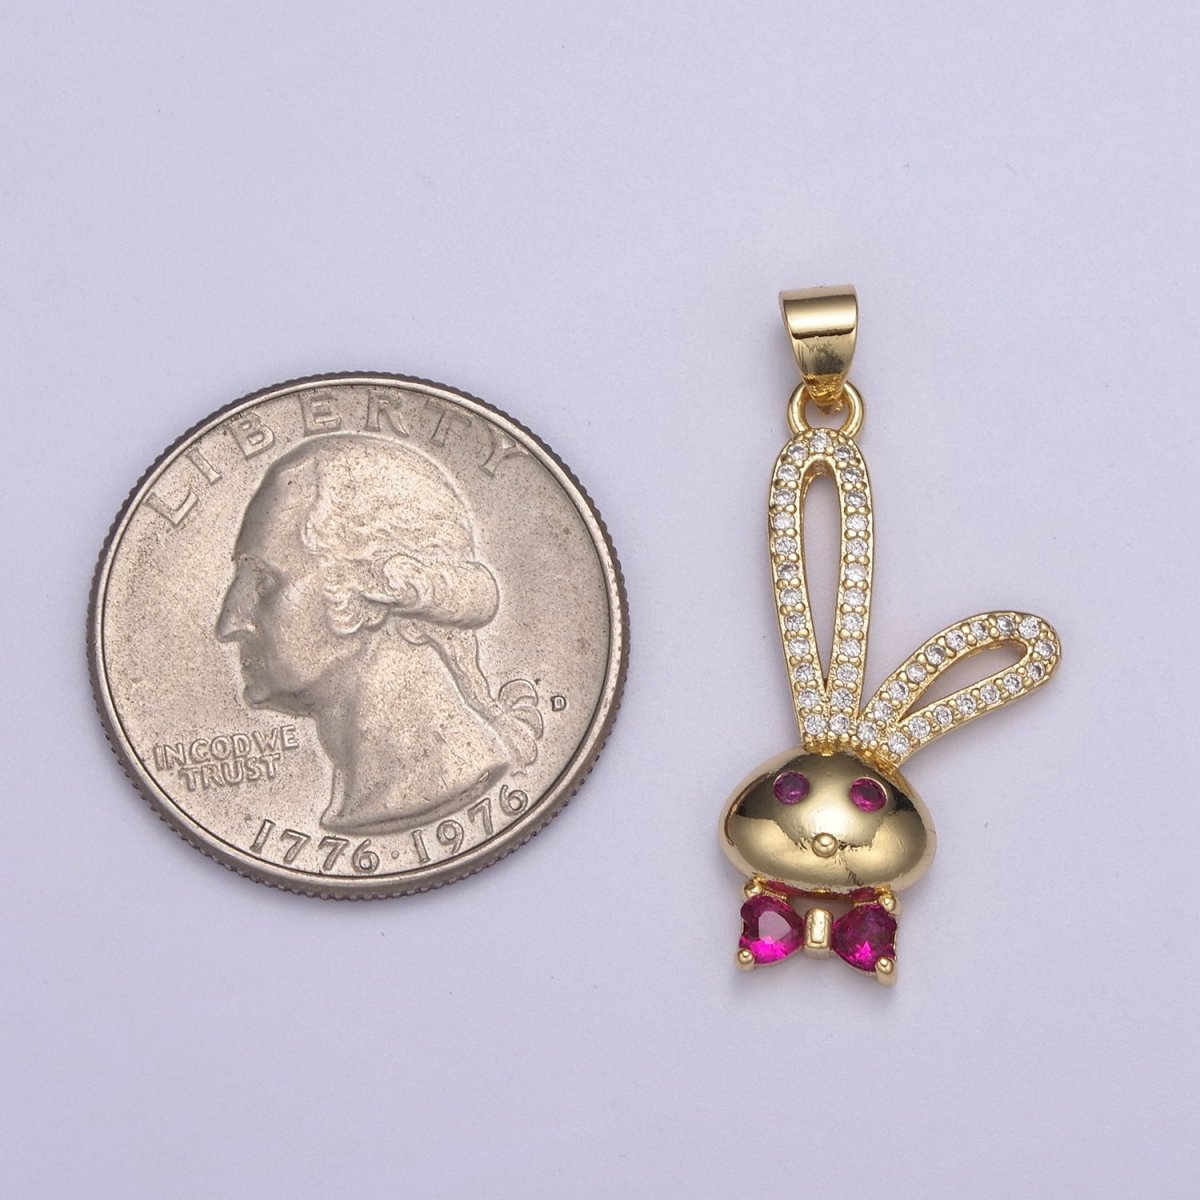 24k Gold Filed CZ Pink Micro Pave Cute Rabbit Pink Bunny with Bowtie Charm Pendant Cubic Zirconia H-597 - DLUXCA